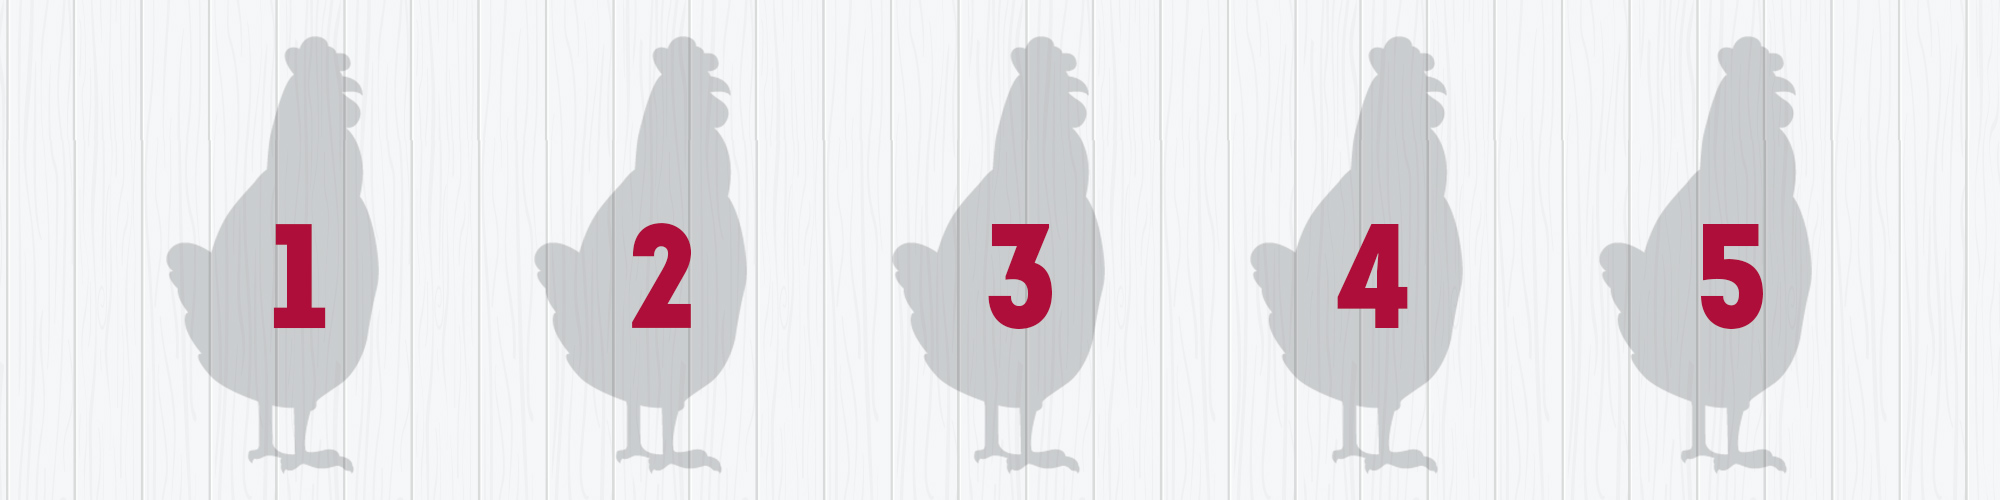 #ScienceHearted Considerations for Poultry